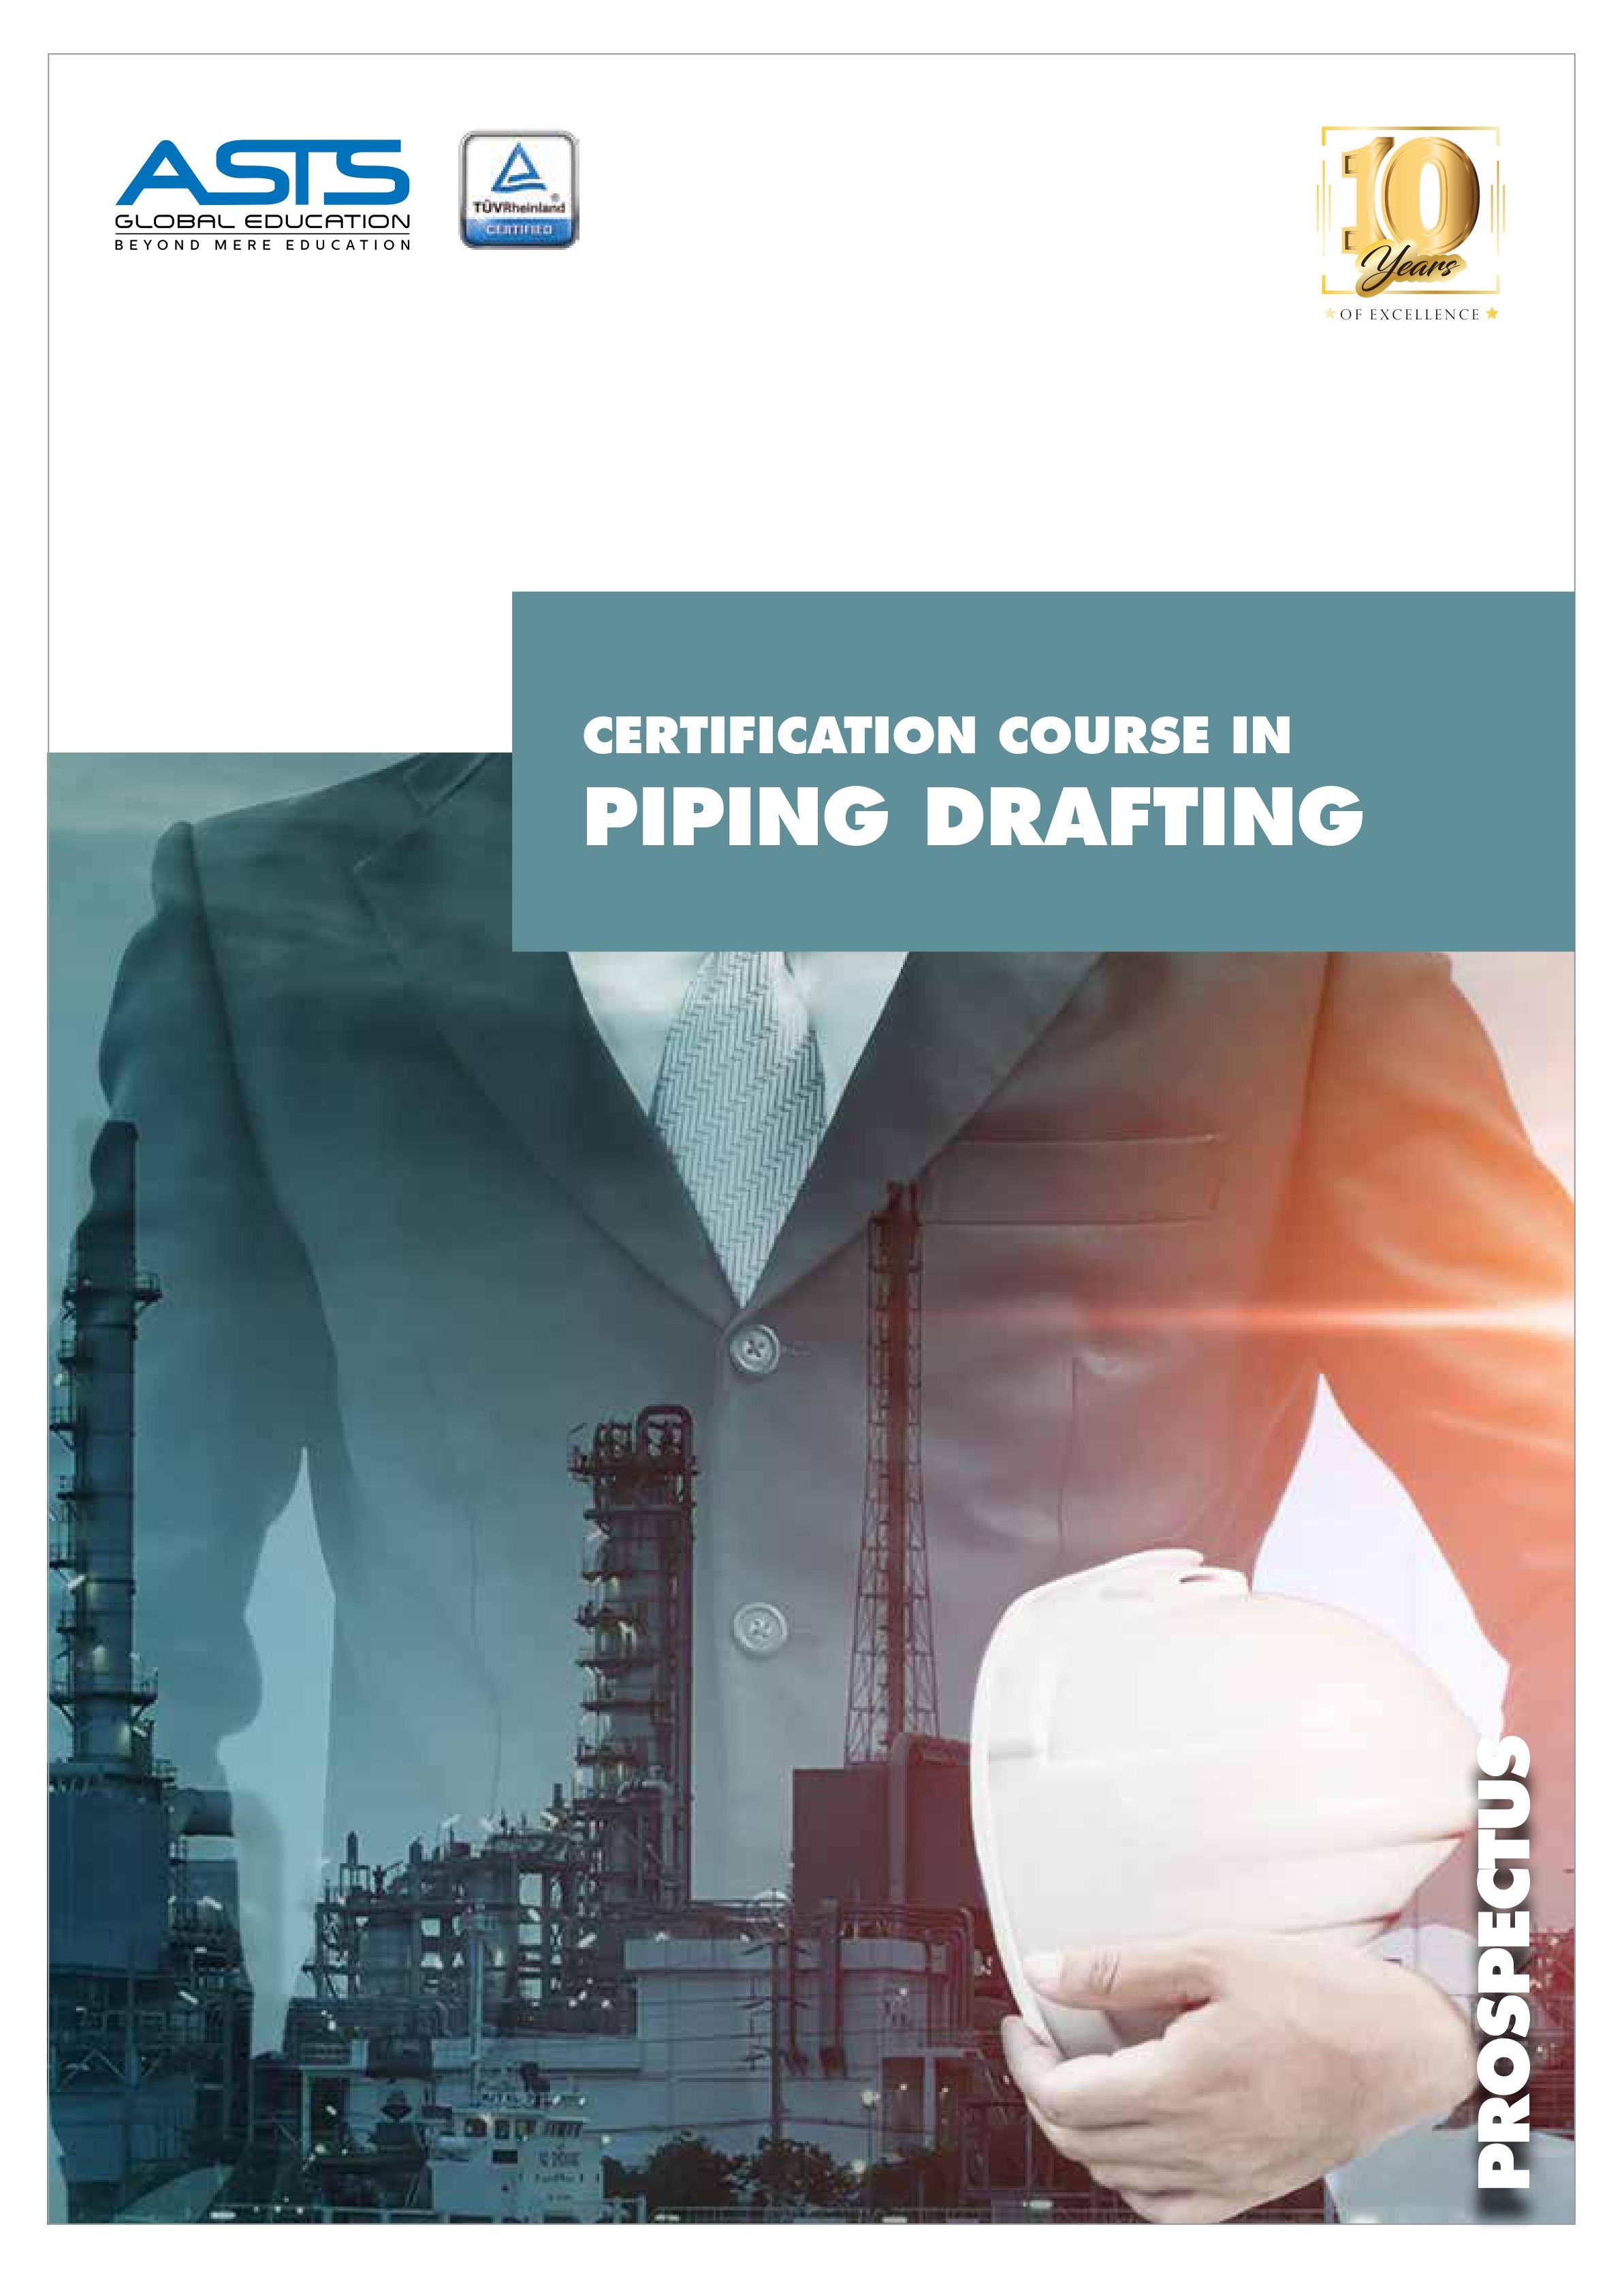 Piping Design & Drafting course online course